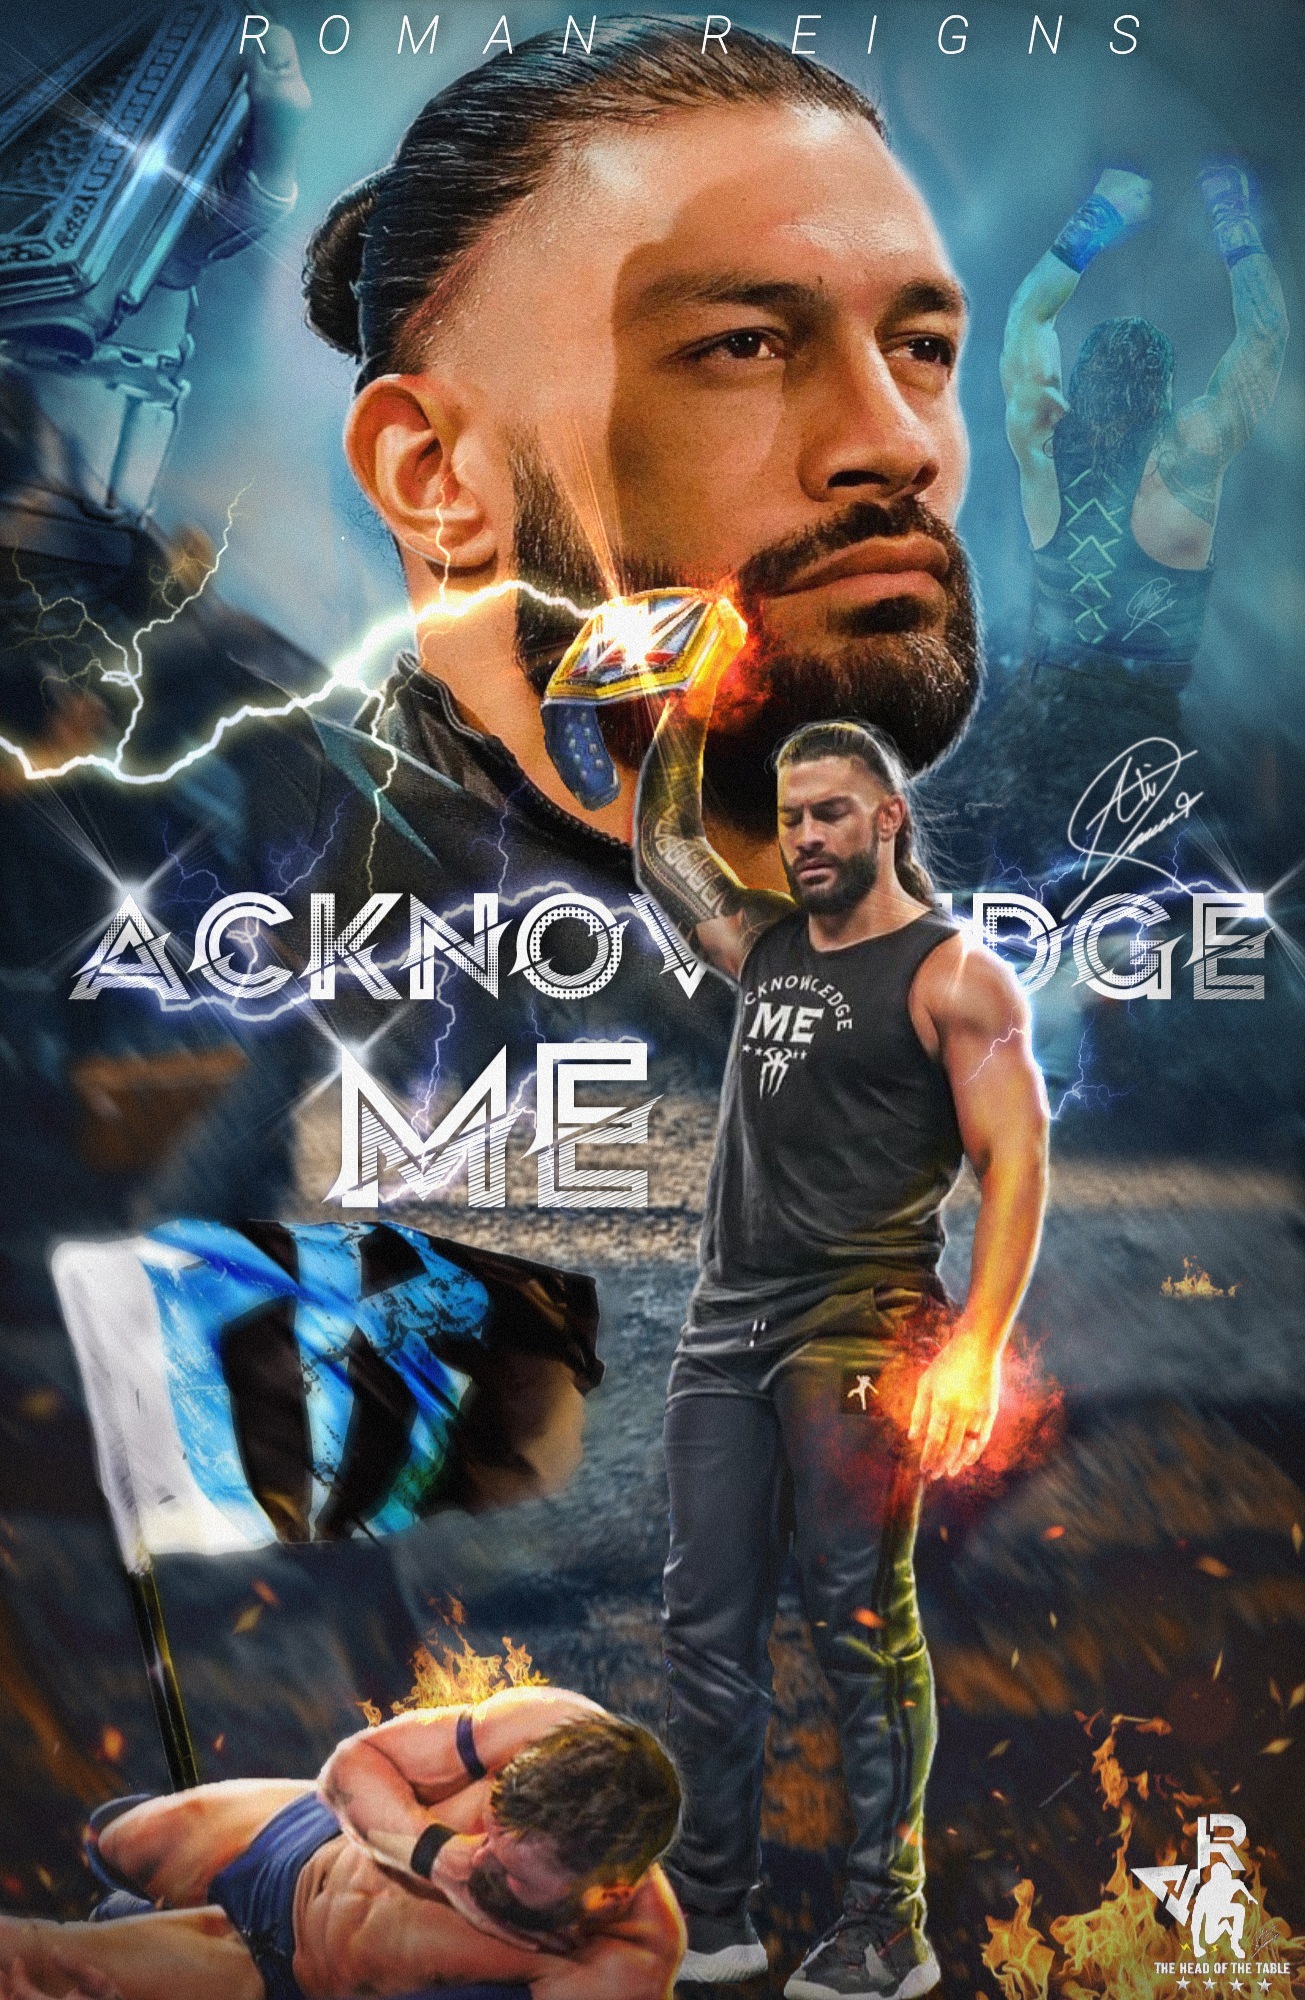 Roman Reigns Acknowledge Me Poster By Aliroman2018 On